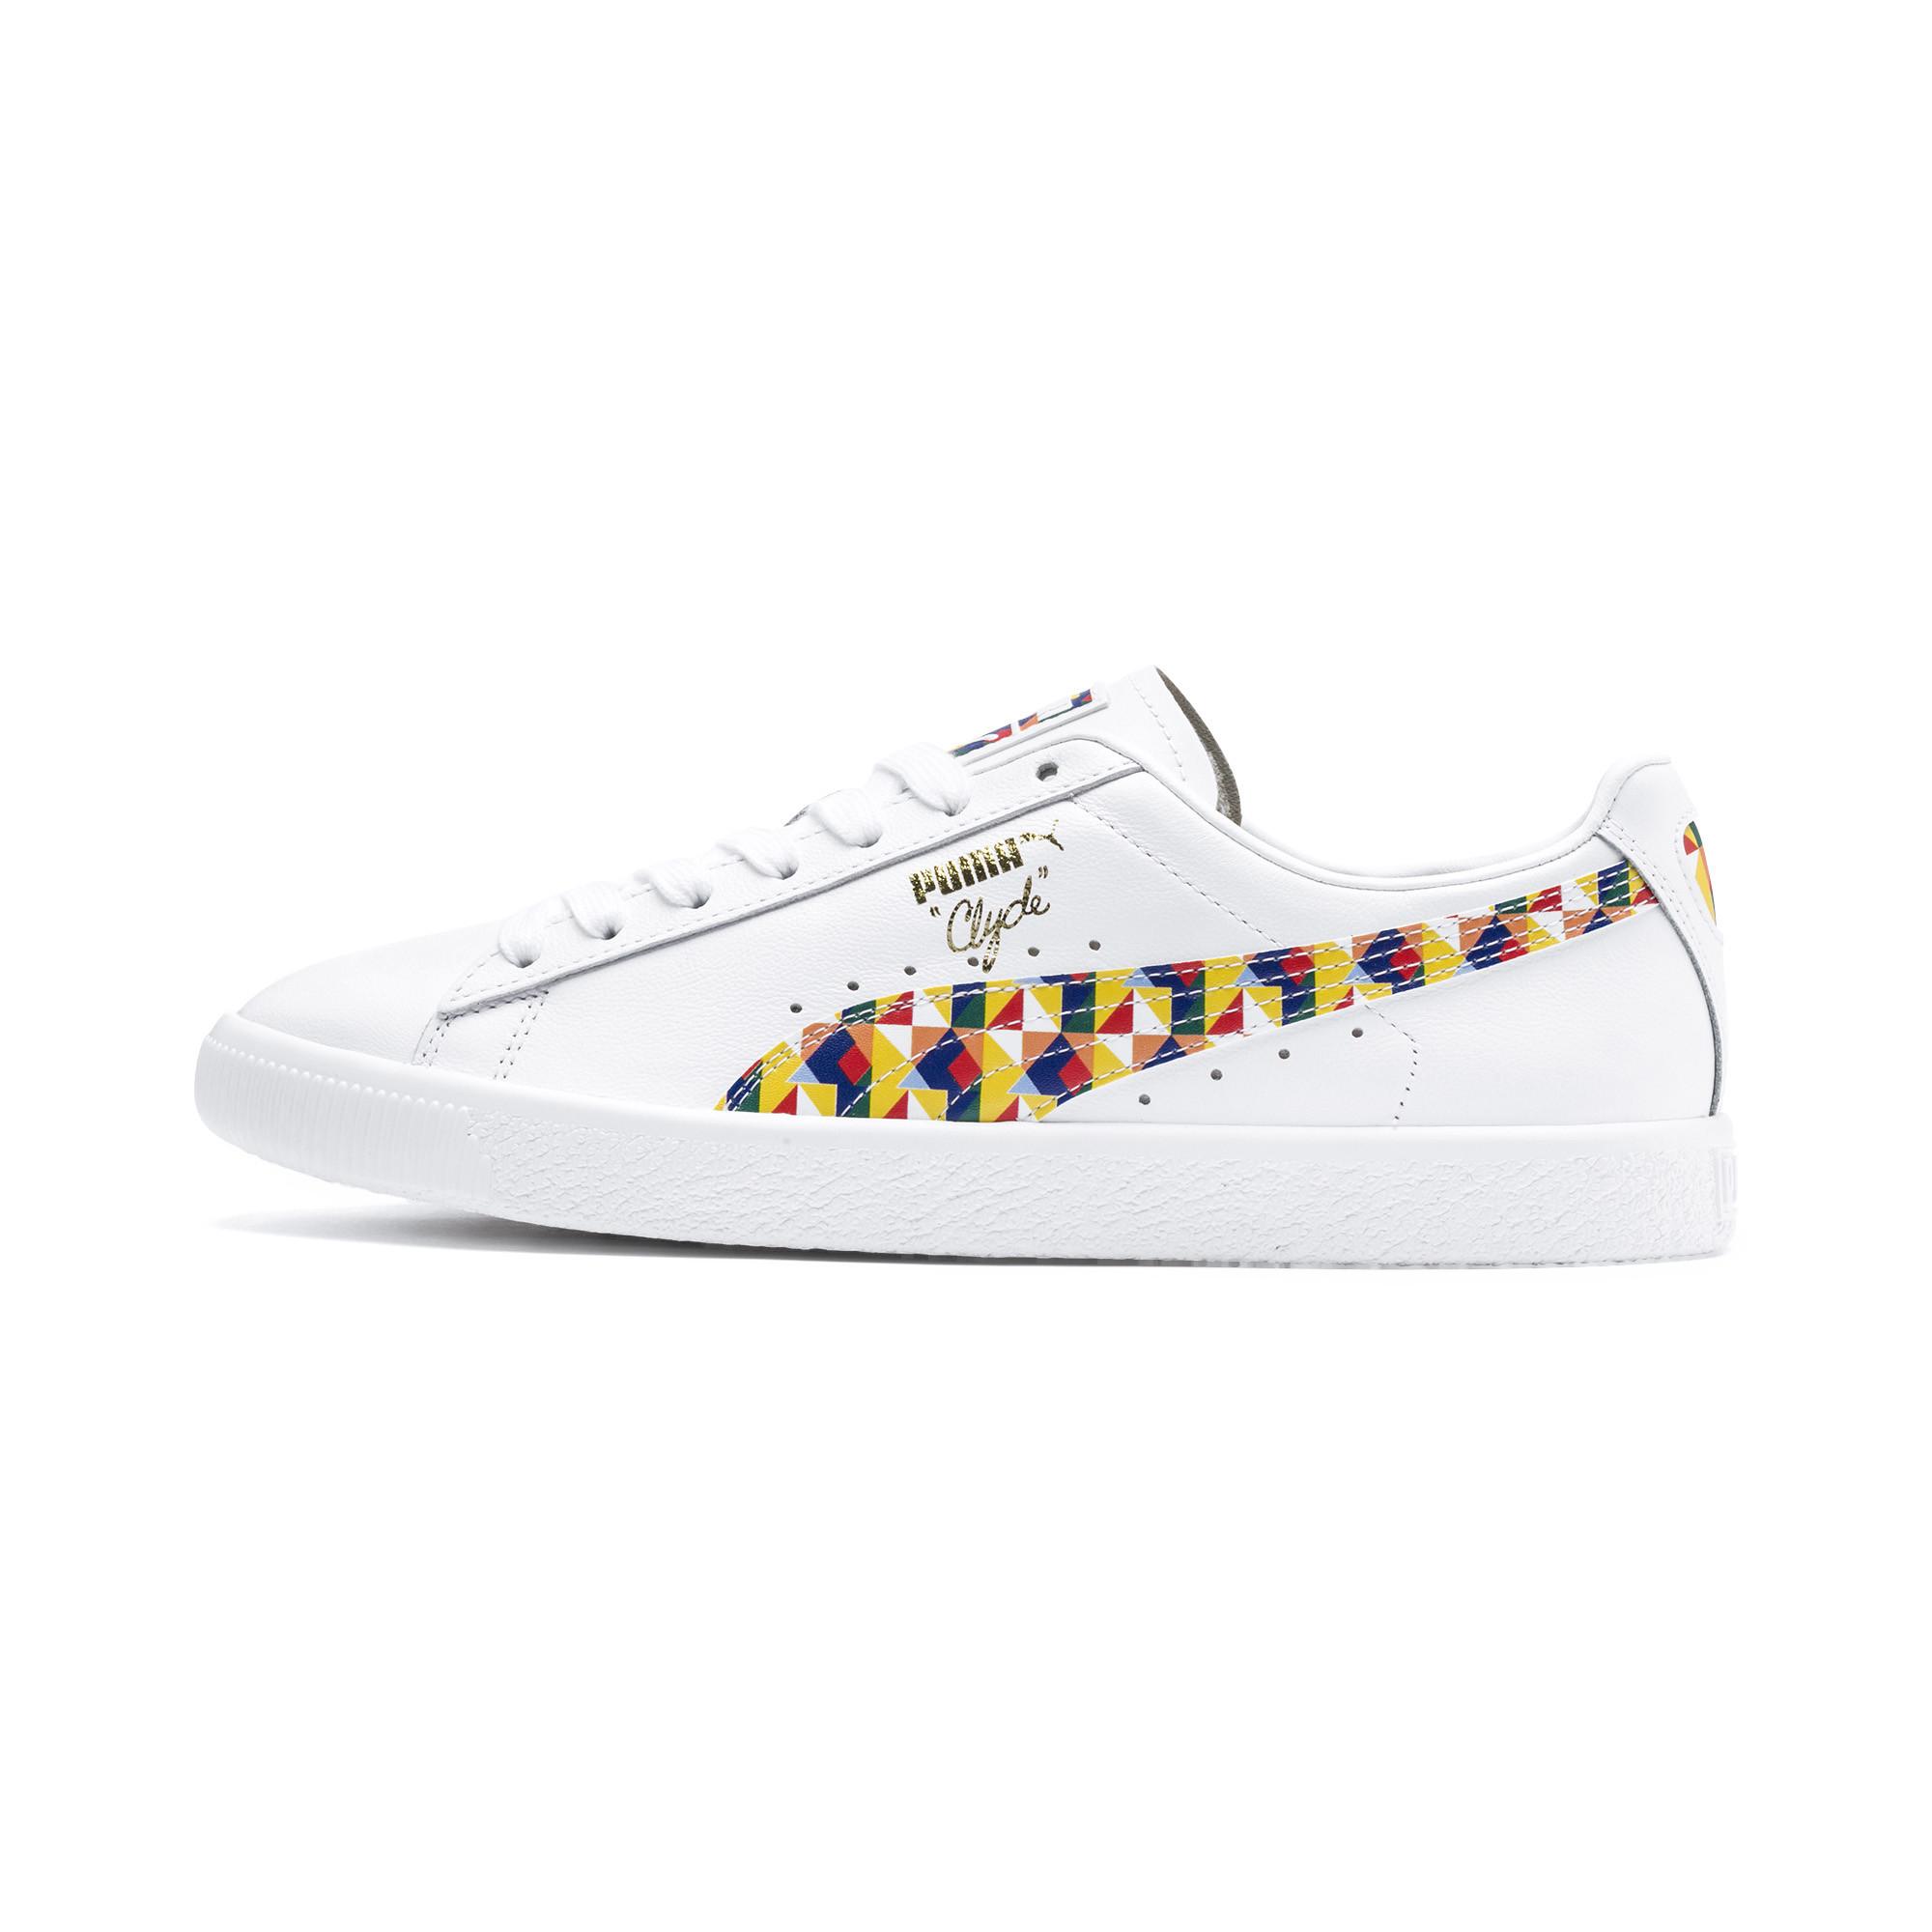 PUMA Leather Clyde Graffiti Sneakers in 01 (White) for Men - Lyst